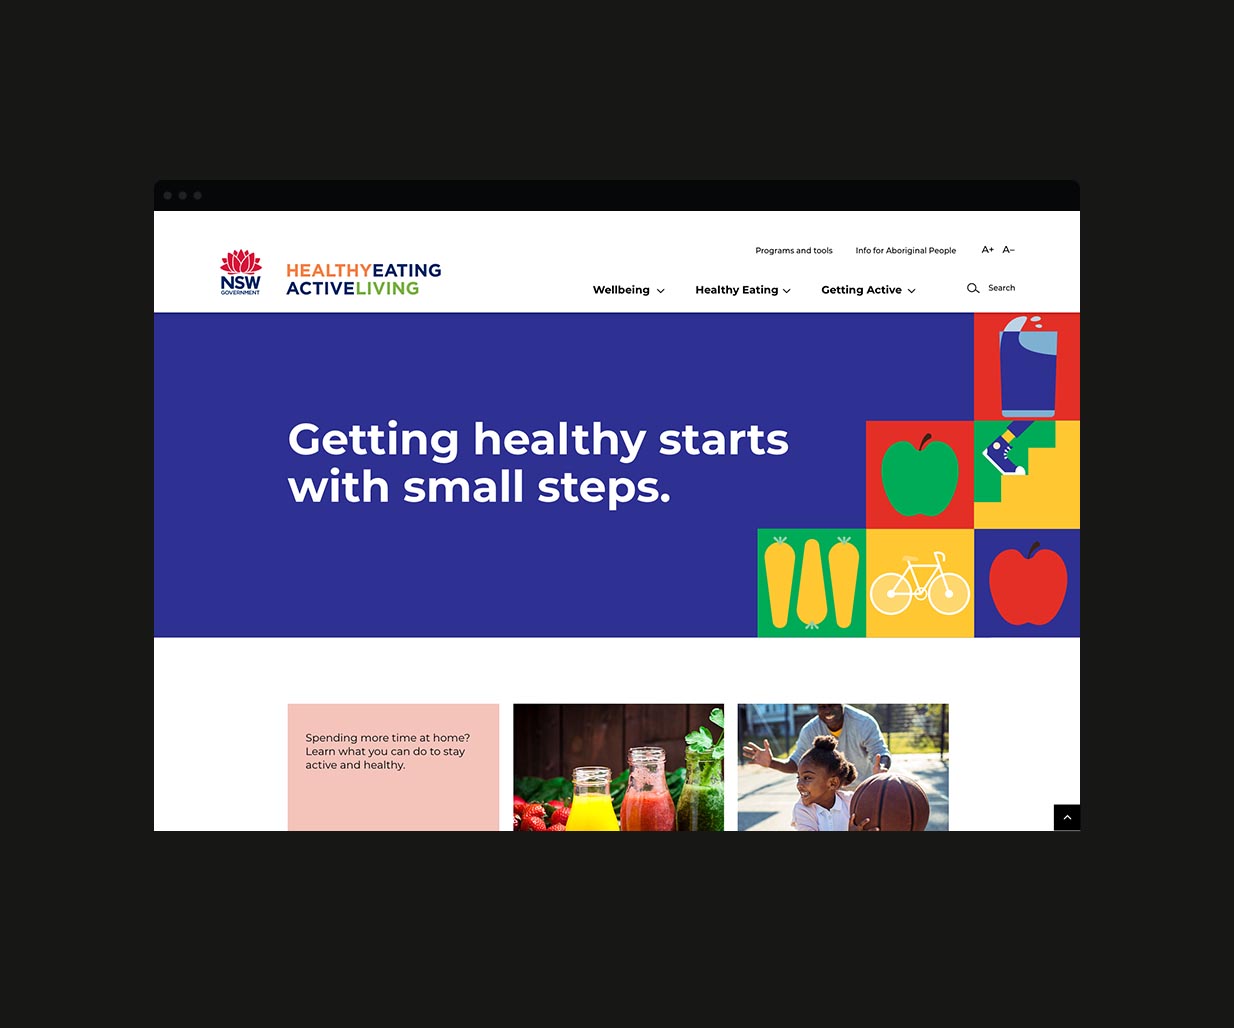 Brand Identity System Design project by Brand Agency, Percept, for NSW Government Health, Sydney, Australia, thumbnail image d